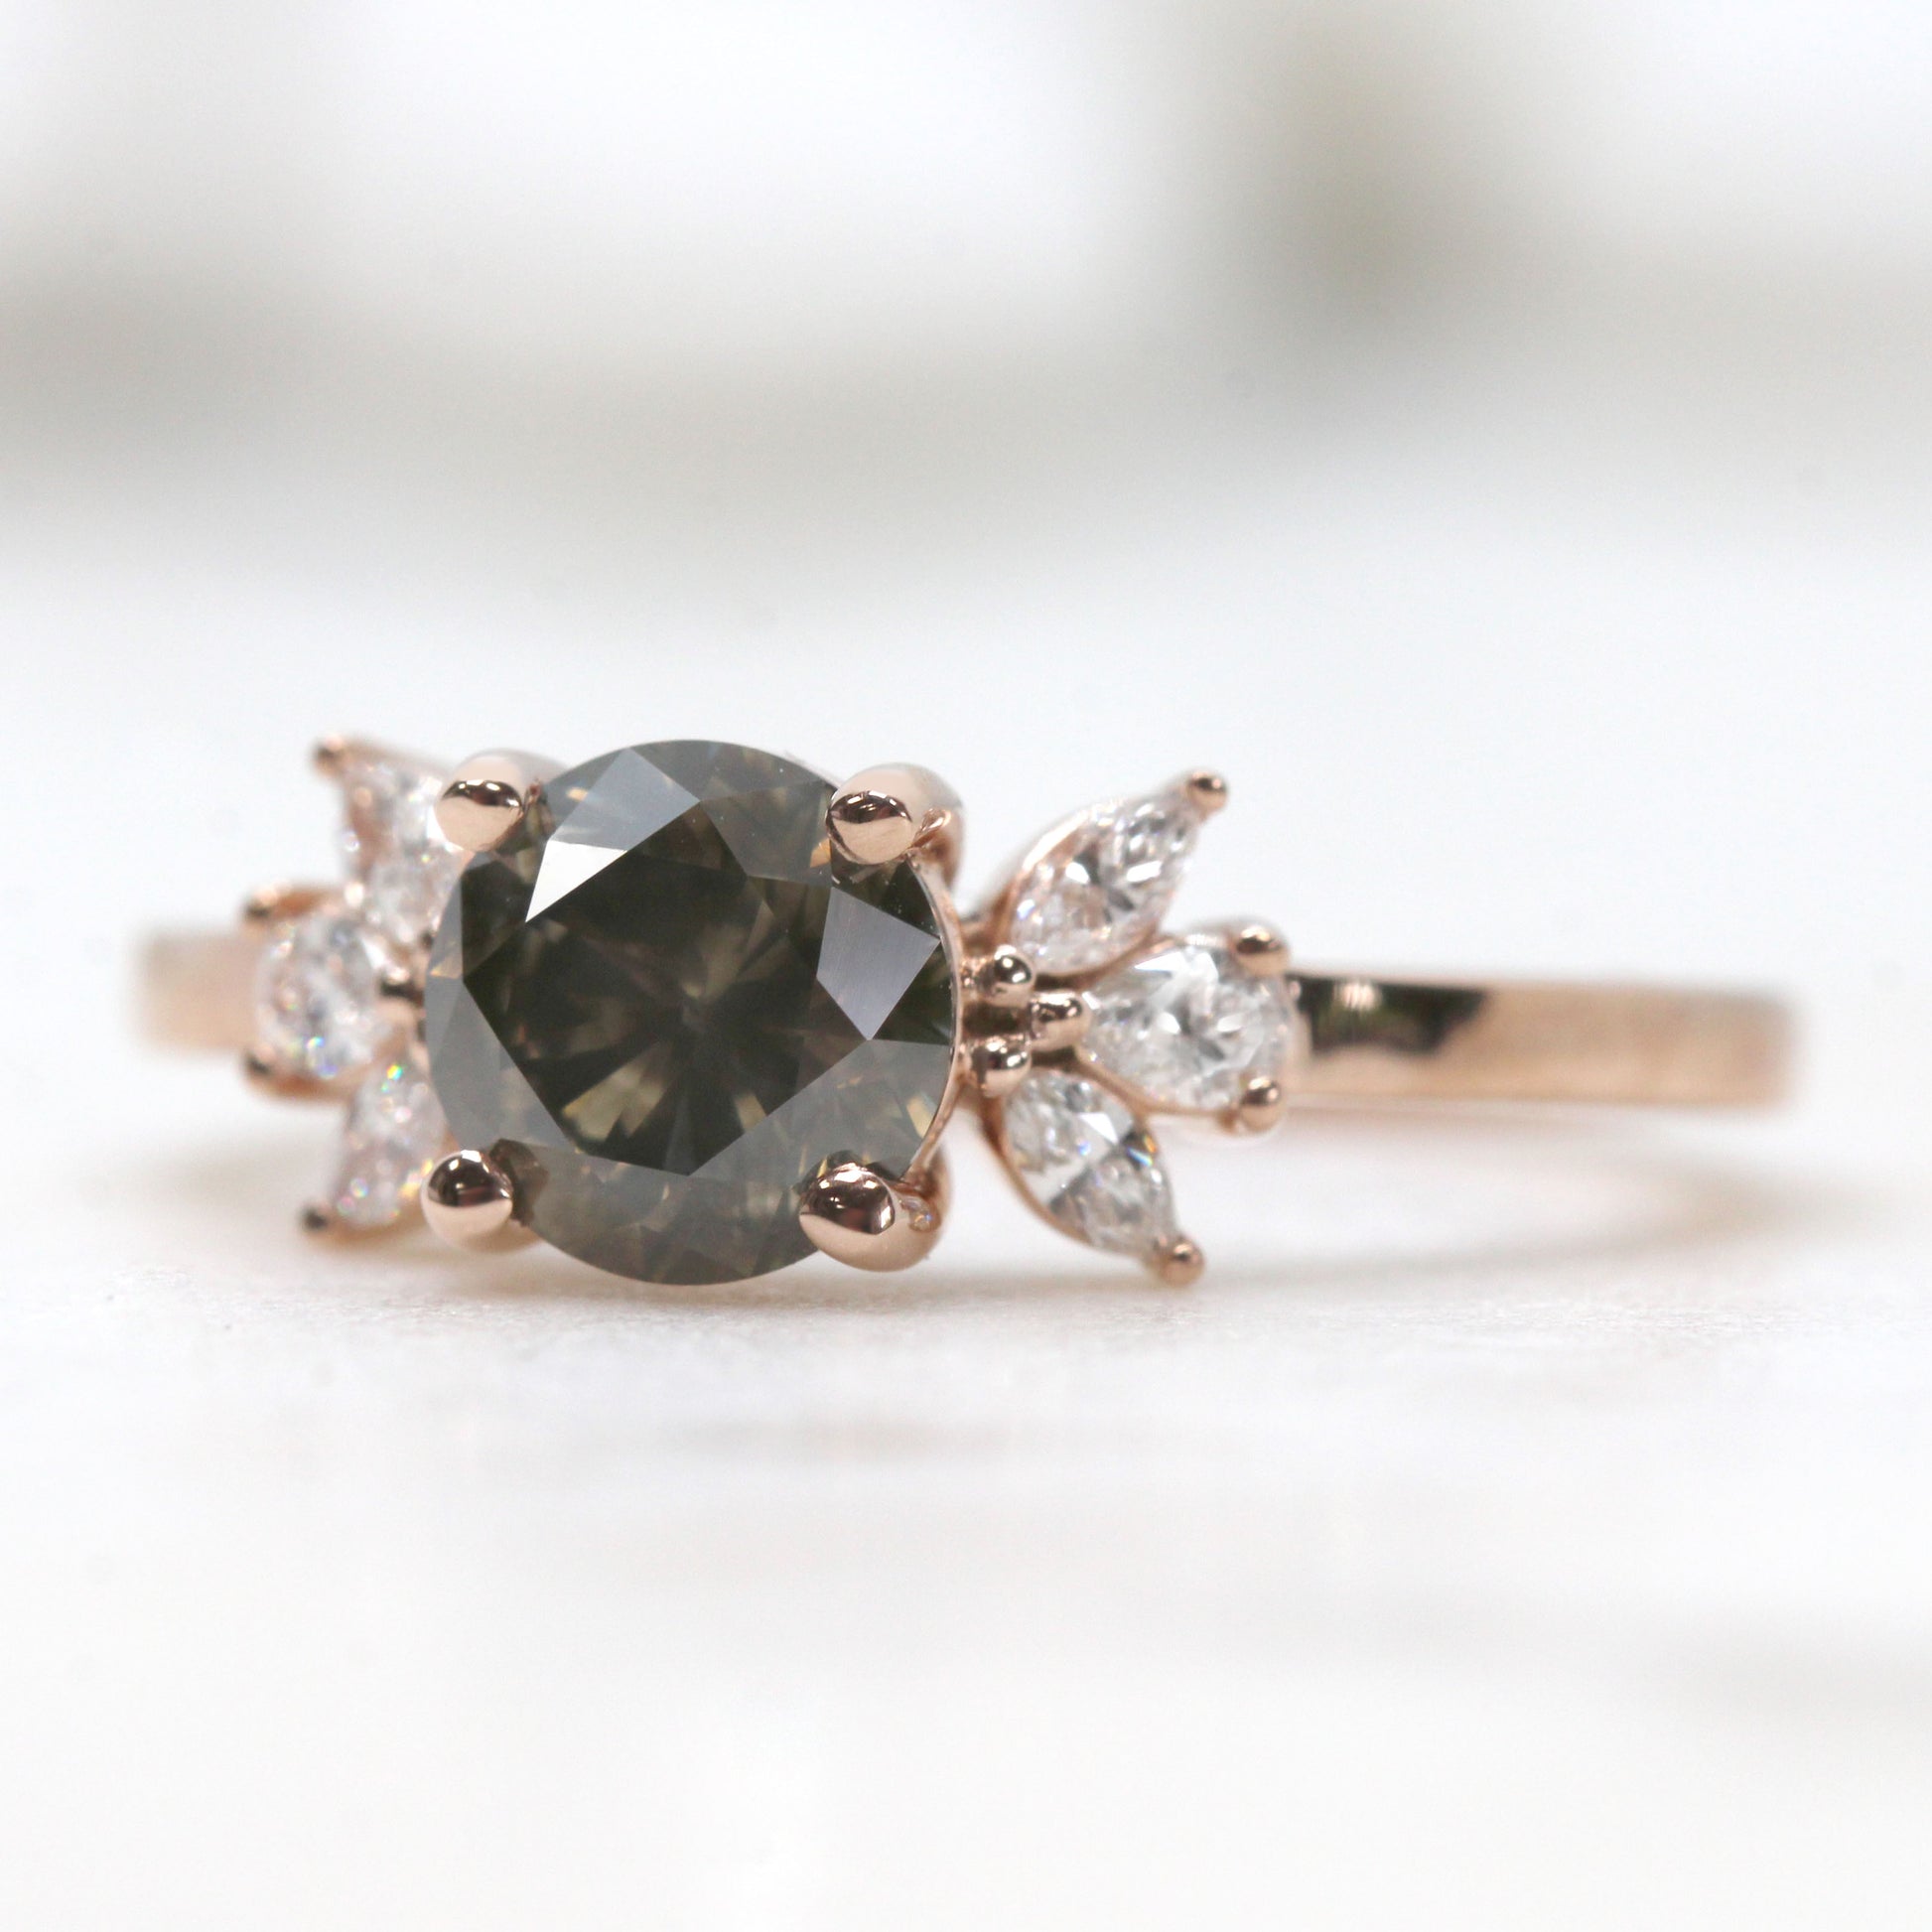 Kendra Ring with a 1.25 Carat Round Champagne Brown Celestial Diamond and White Accent Diamonds in 14k Rose Gold - Ready to Size and Ship - Midwinter Co. Alternative Bridal Rings and Modern Fine Jewelry